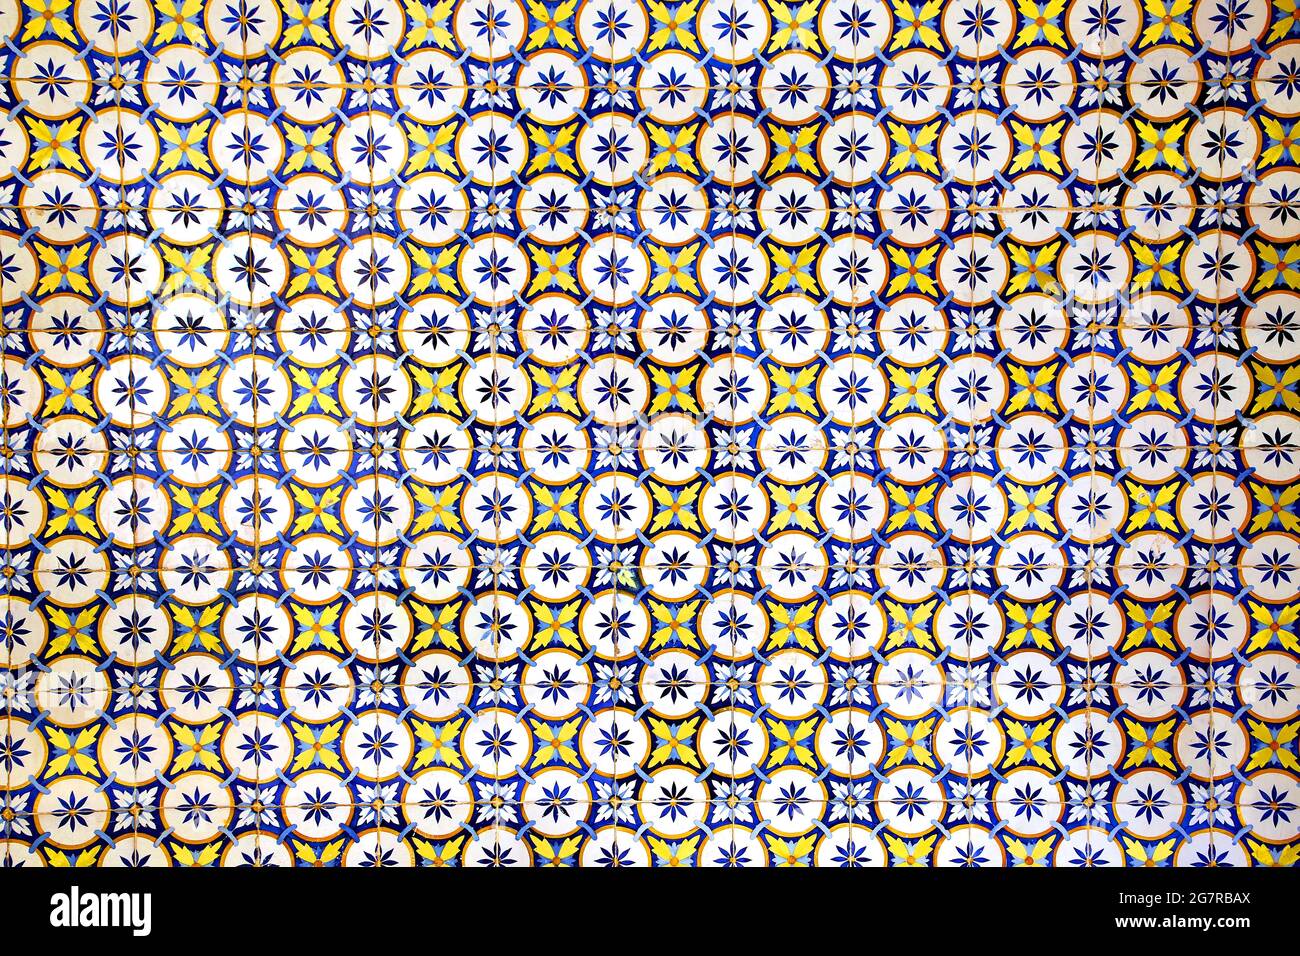 Traditional glazed blue, yellow and white ceramic tiles or azulejos which cover many buildings in Lisbon, Portugal. These Portugese tiles have many di Stock Photo